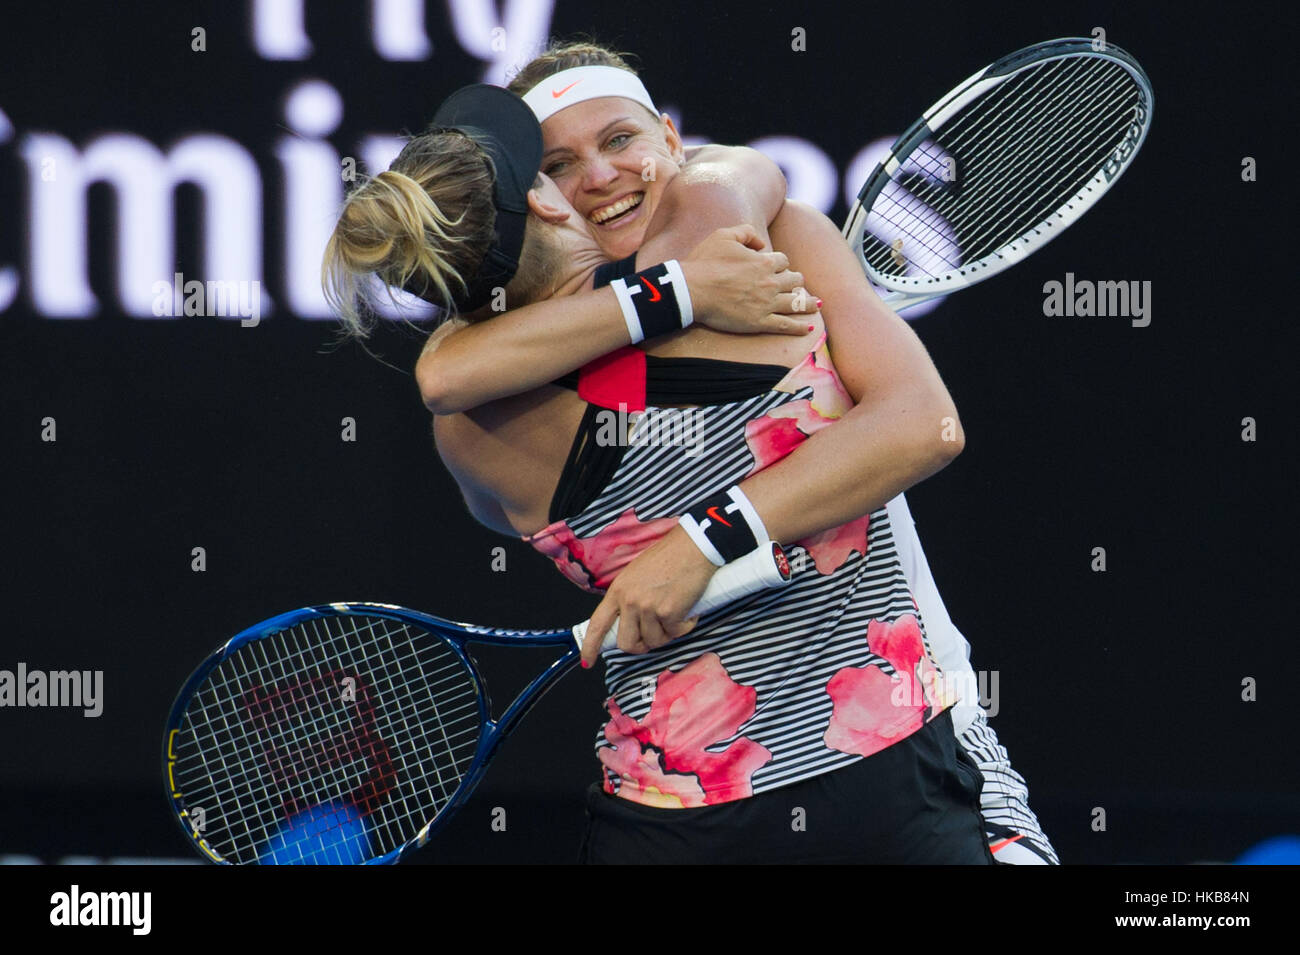 Melbourne, Australia. 27th Jan, 2017. Bethanie Mattek-Sands (front) of the U.S. and Lucie Safarova of the Czech Republic celebrate after winning the women's doubles final against Andrea Hlavackova of the Czech Republic and Peng Shuai of China at the Australian Open tennis championships in Melbourne, Australia, Jan. 27, 2017. Bethanie Mattek-Sands of the U.S. and Lucie Safarova of the Czech Republic won 2-1. Credit: Bai Xue/Xinhua/Alamy Live News Stock Photo